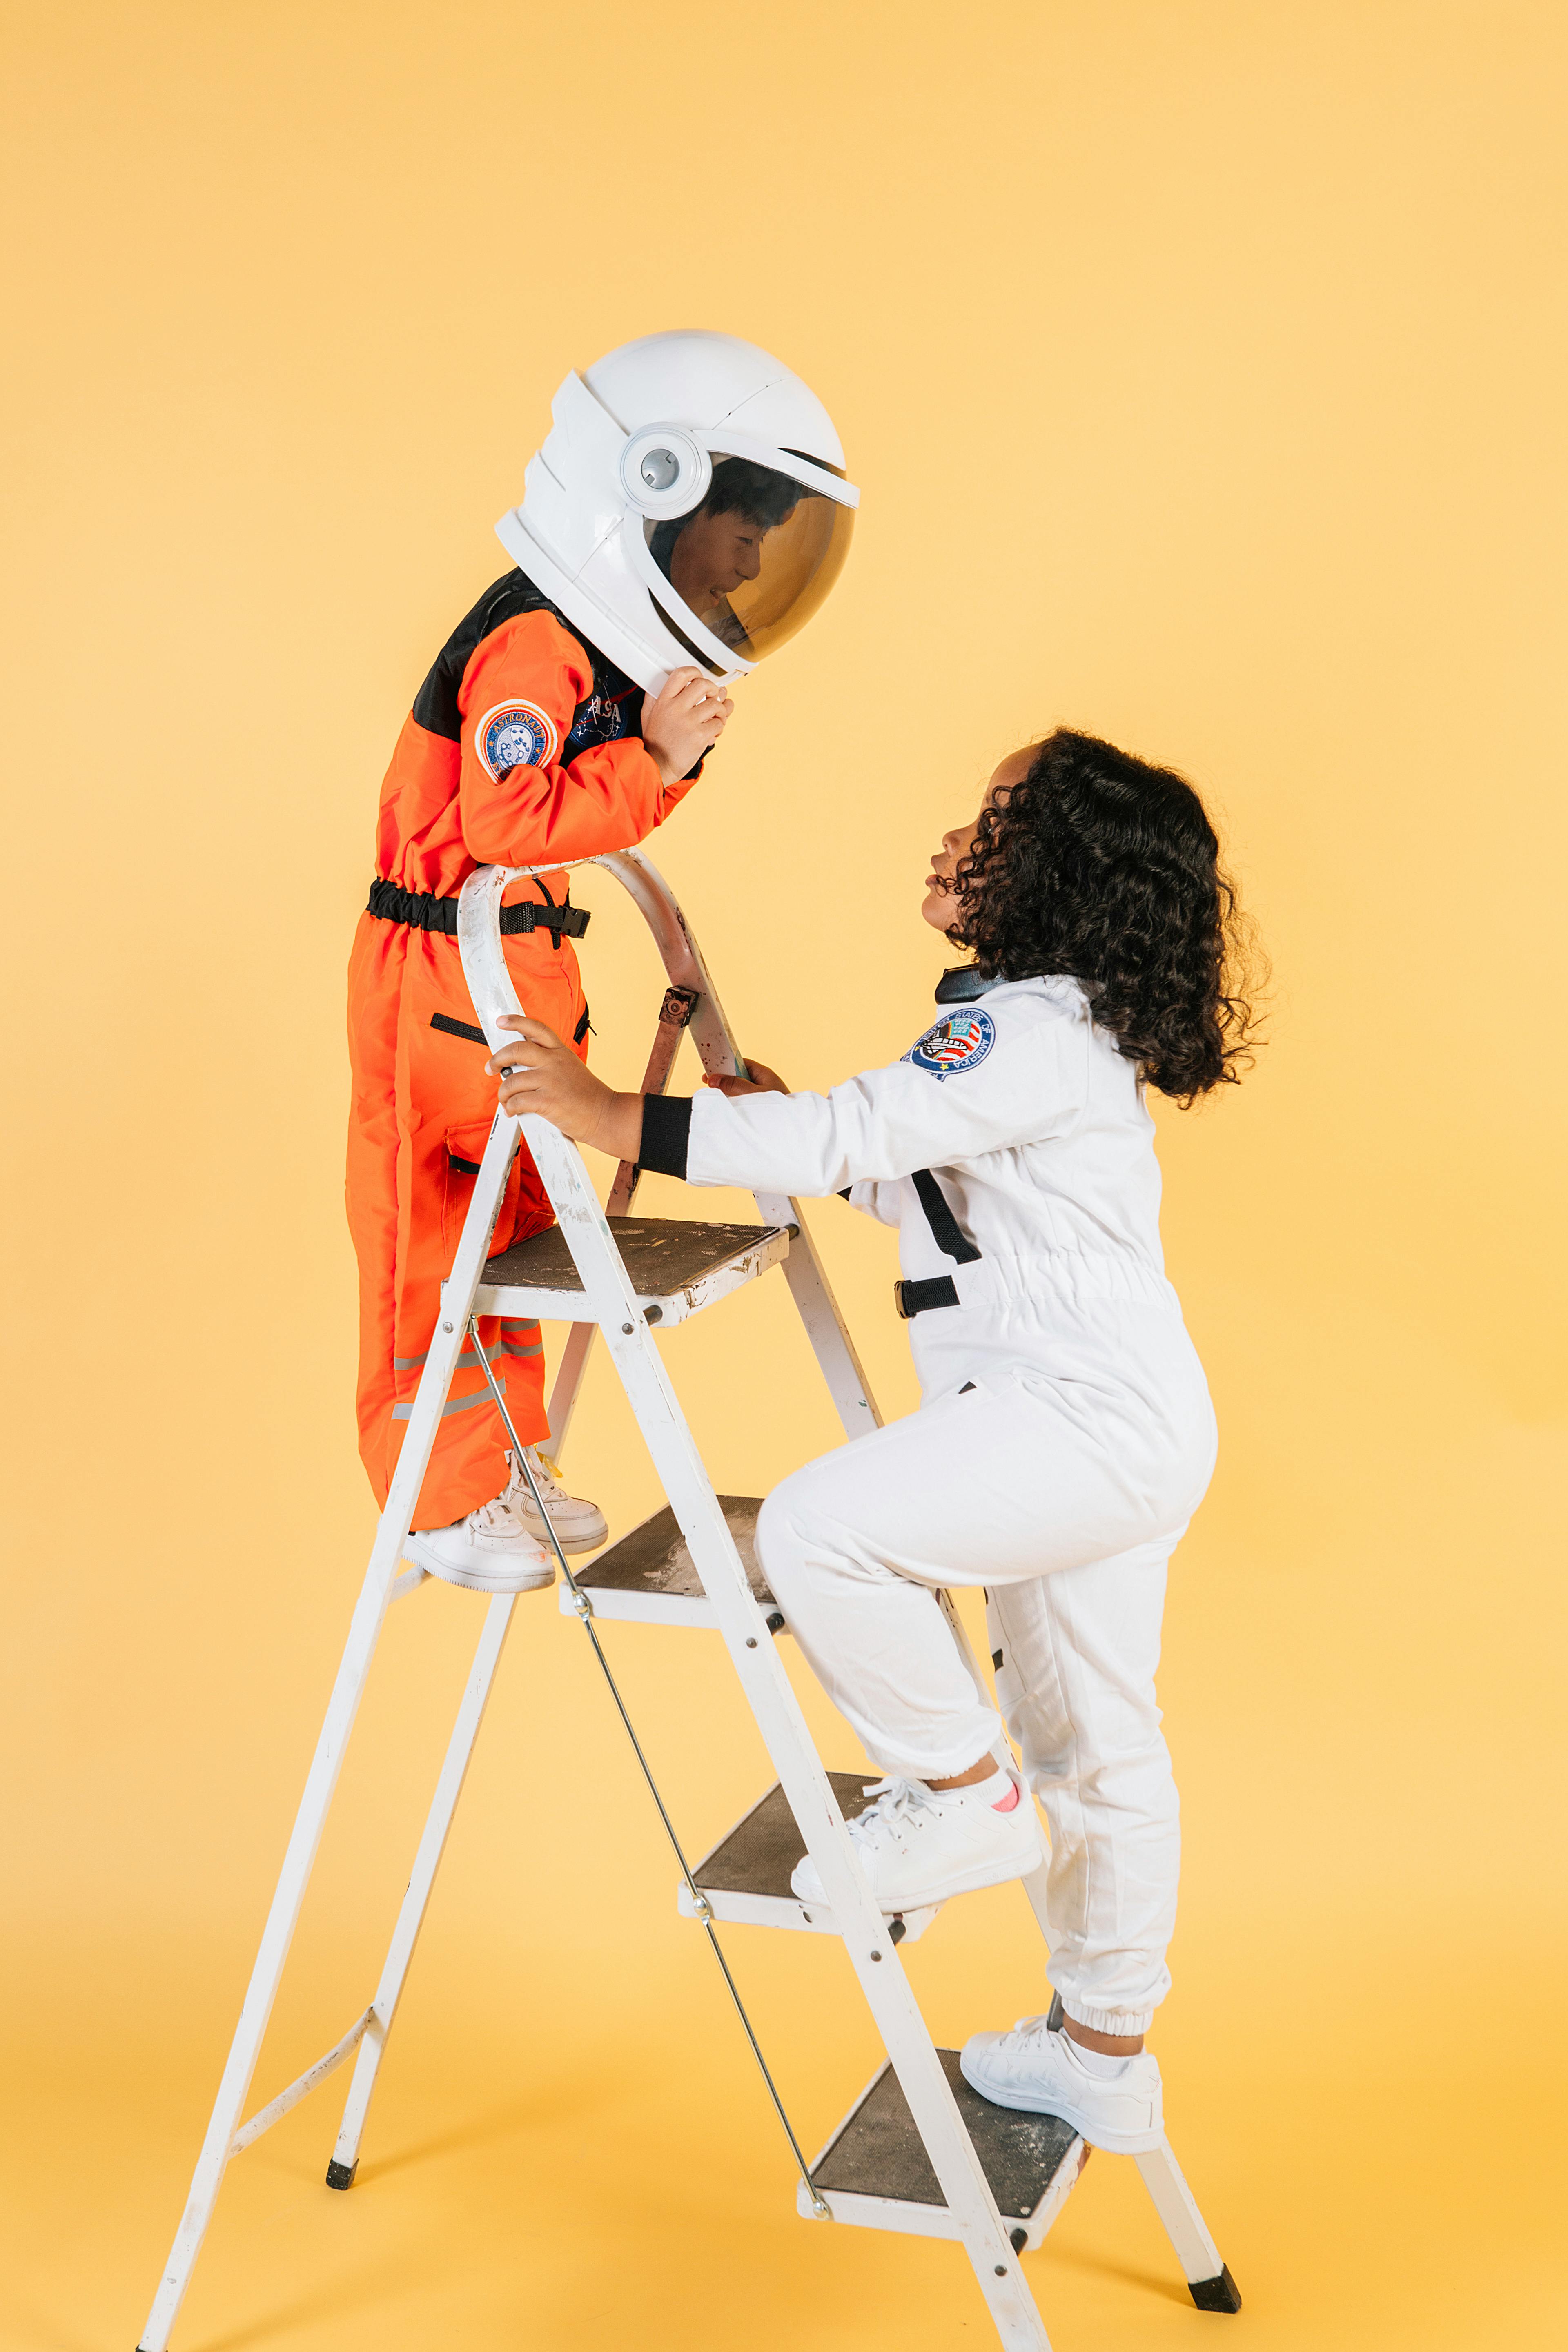 children in astronaut costumes playing in studio with yellow walls